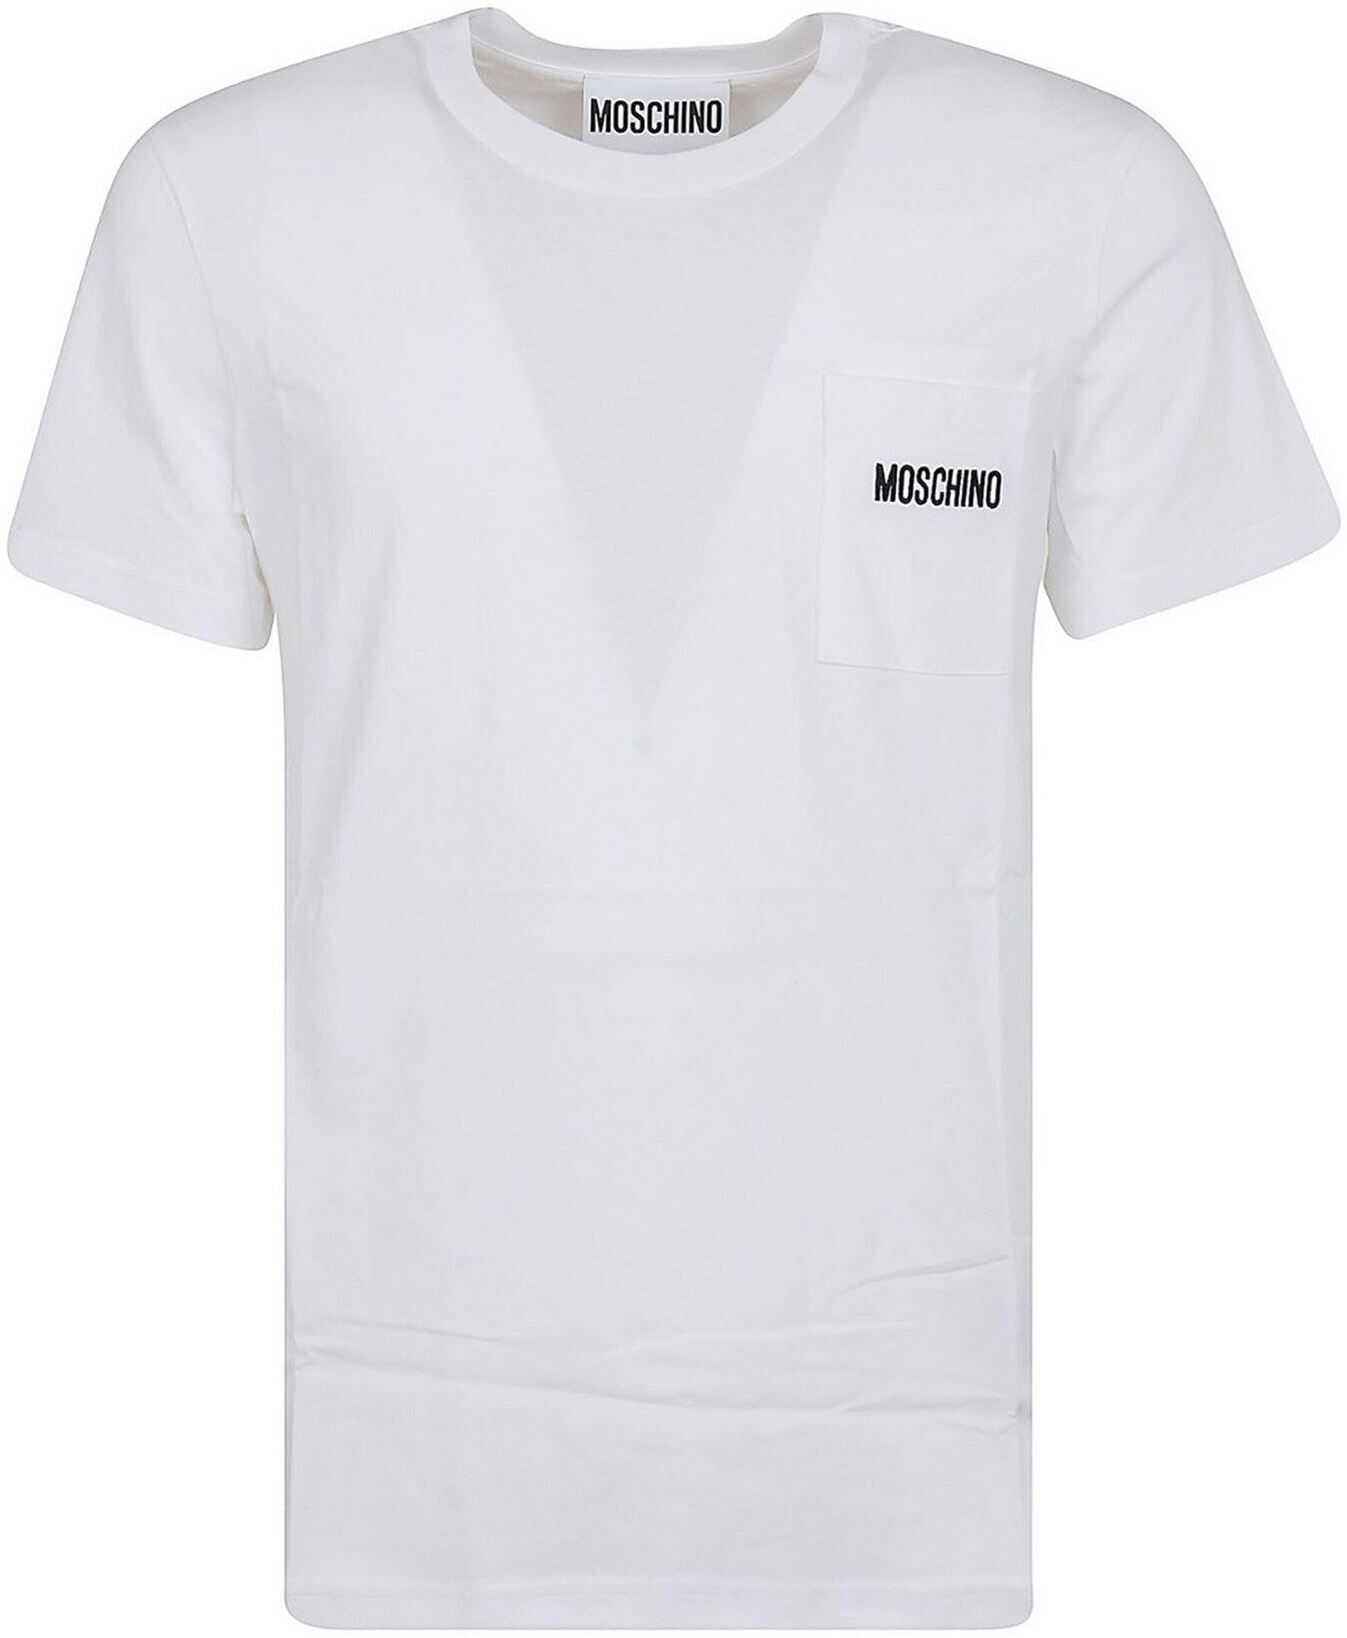 Moschino Branded Patch Pocket T-Shirt In White White